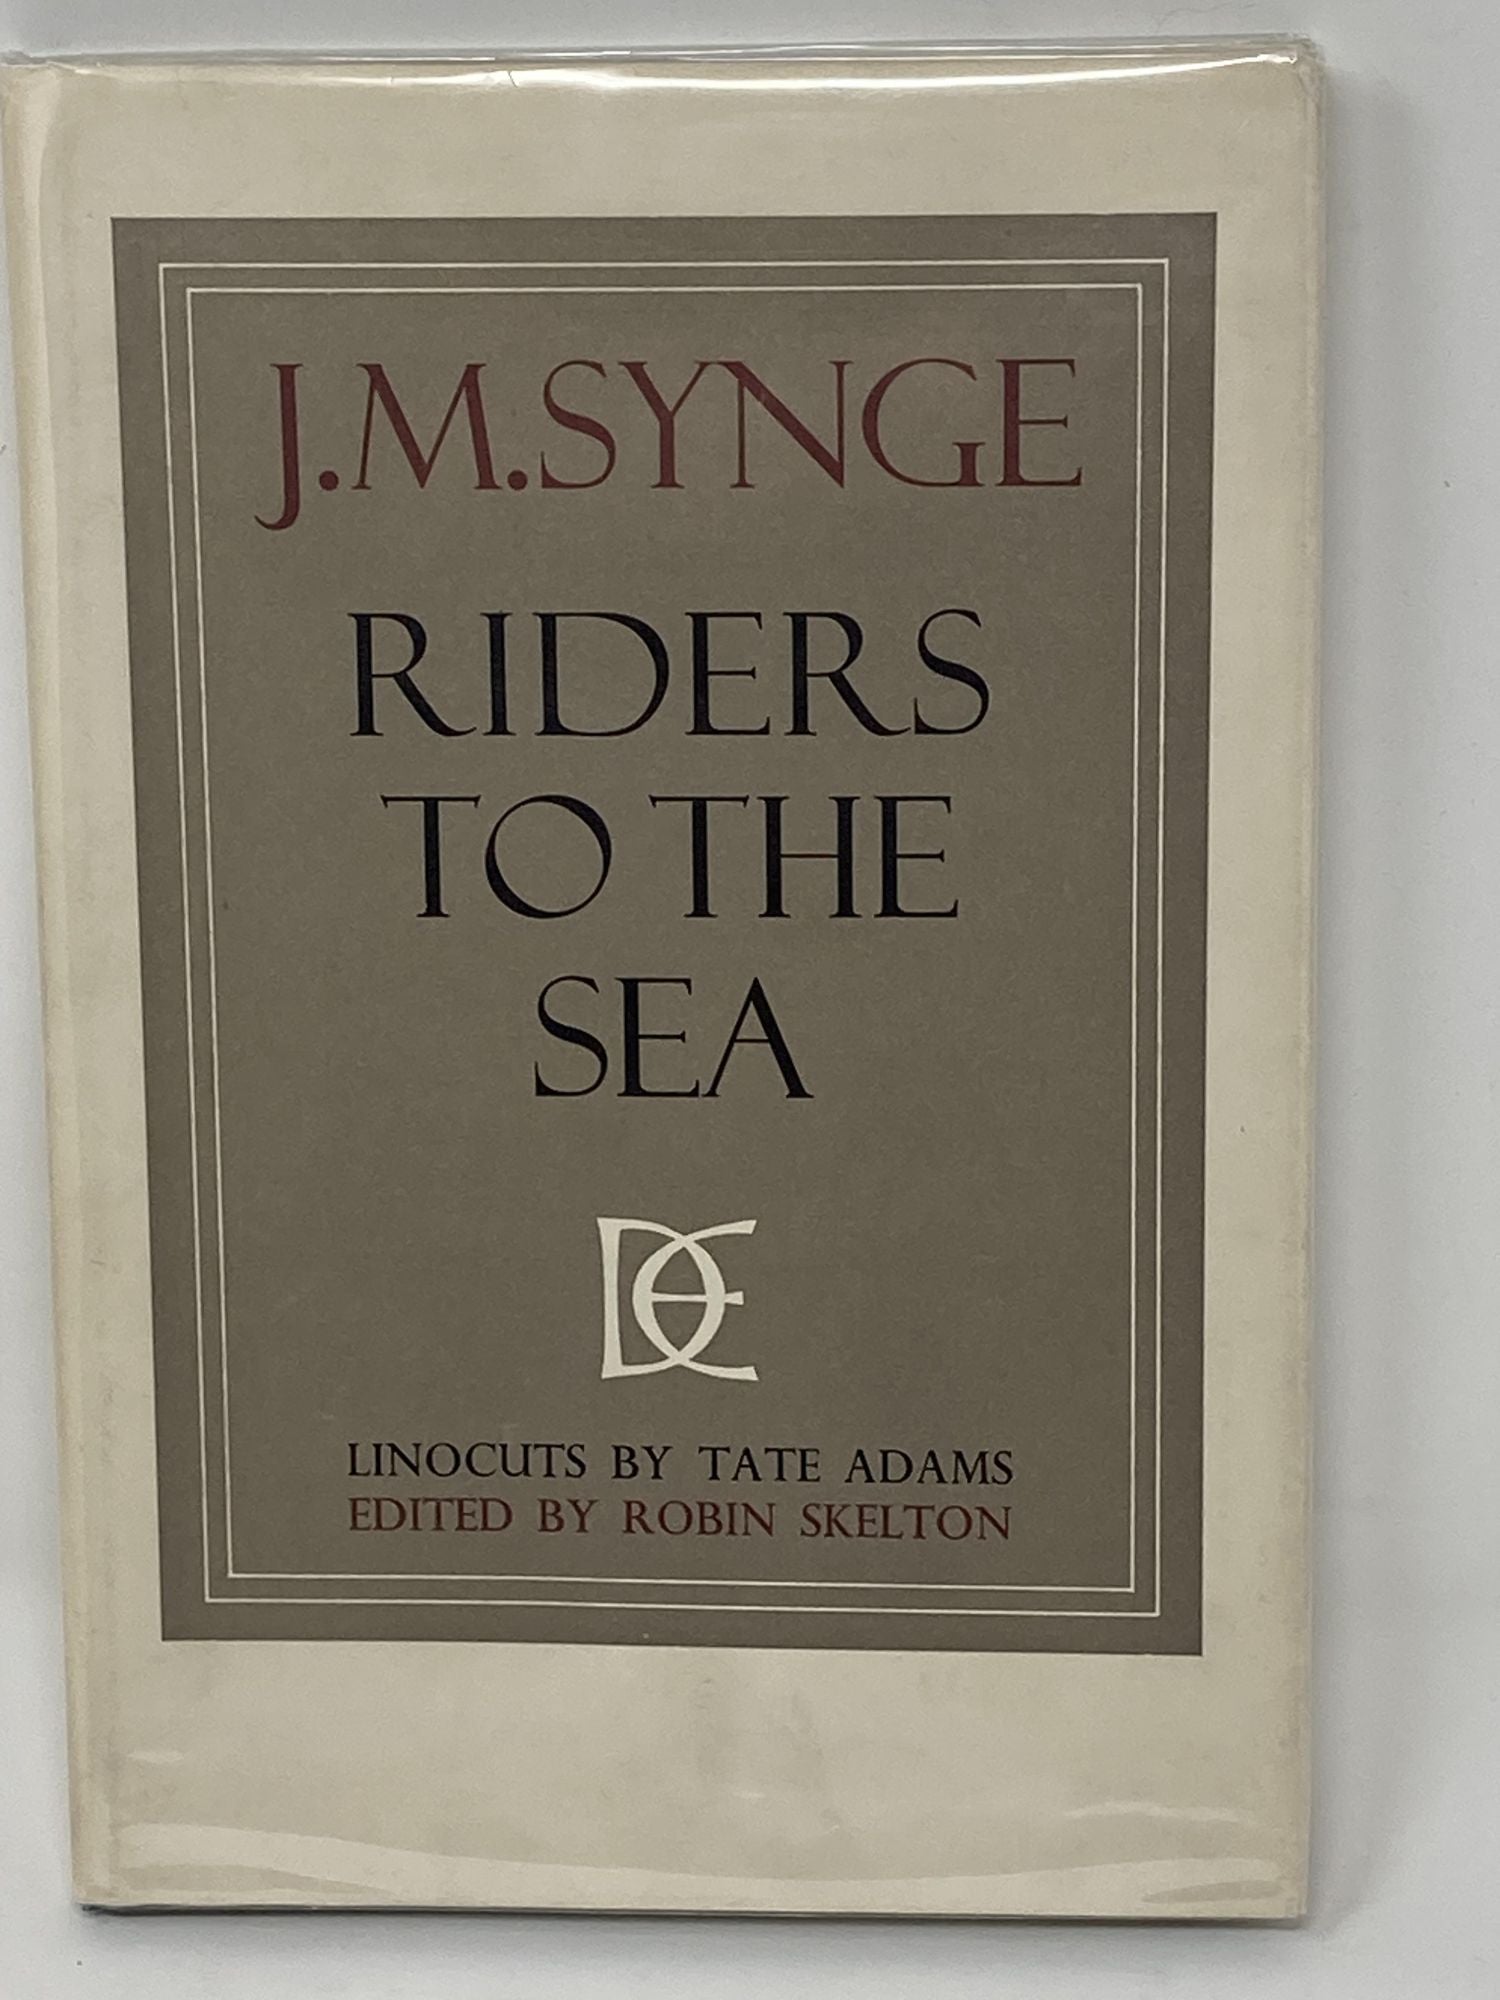 Synge, J.M. - Riders to the Sea, Edited by Robin Skelton from the Manuscript in the Houghton Library in Harvard University with Five Linocuts in Colour by Tate Adams, Dolmen Editions VIII